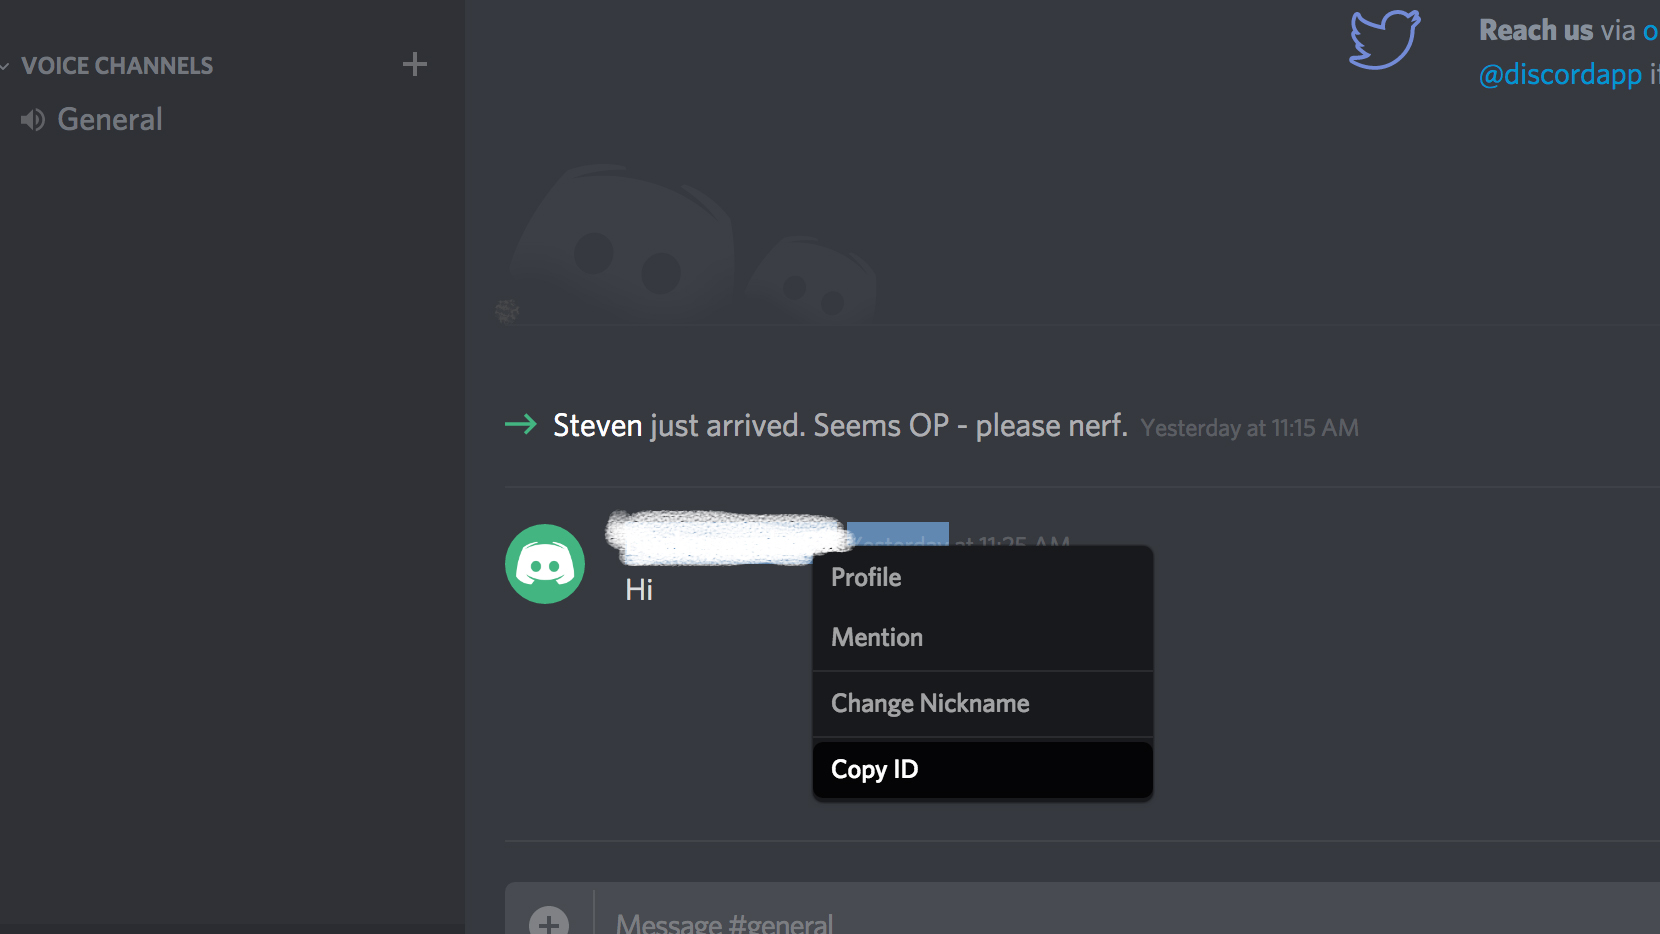 really funny that they won't ban hacker. so report them on discord